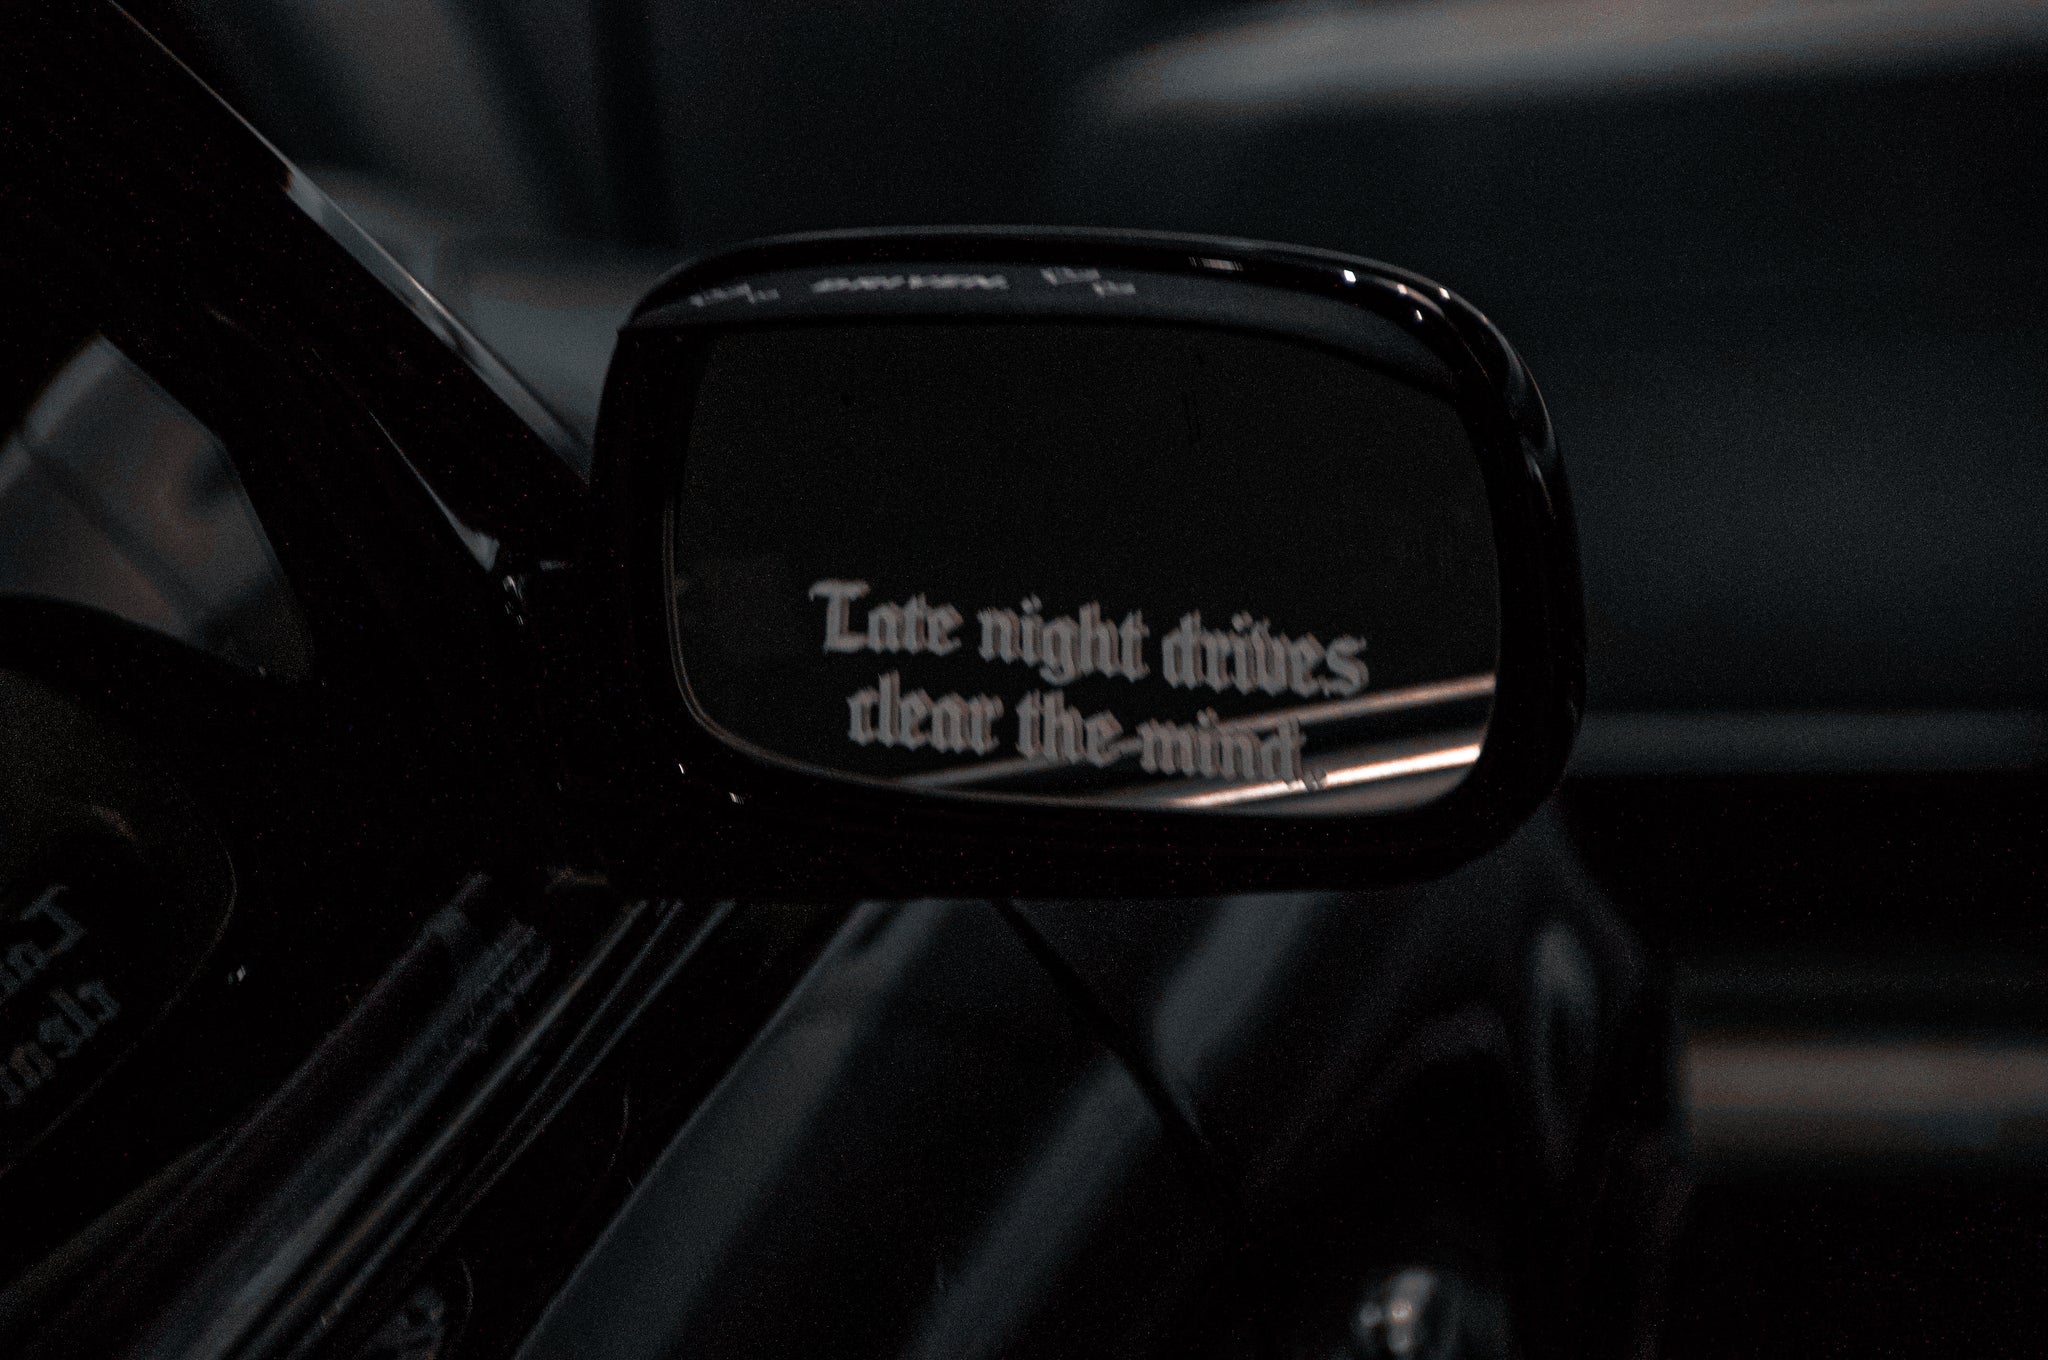 Late night drives clear the mind! | Baby Decal